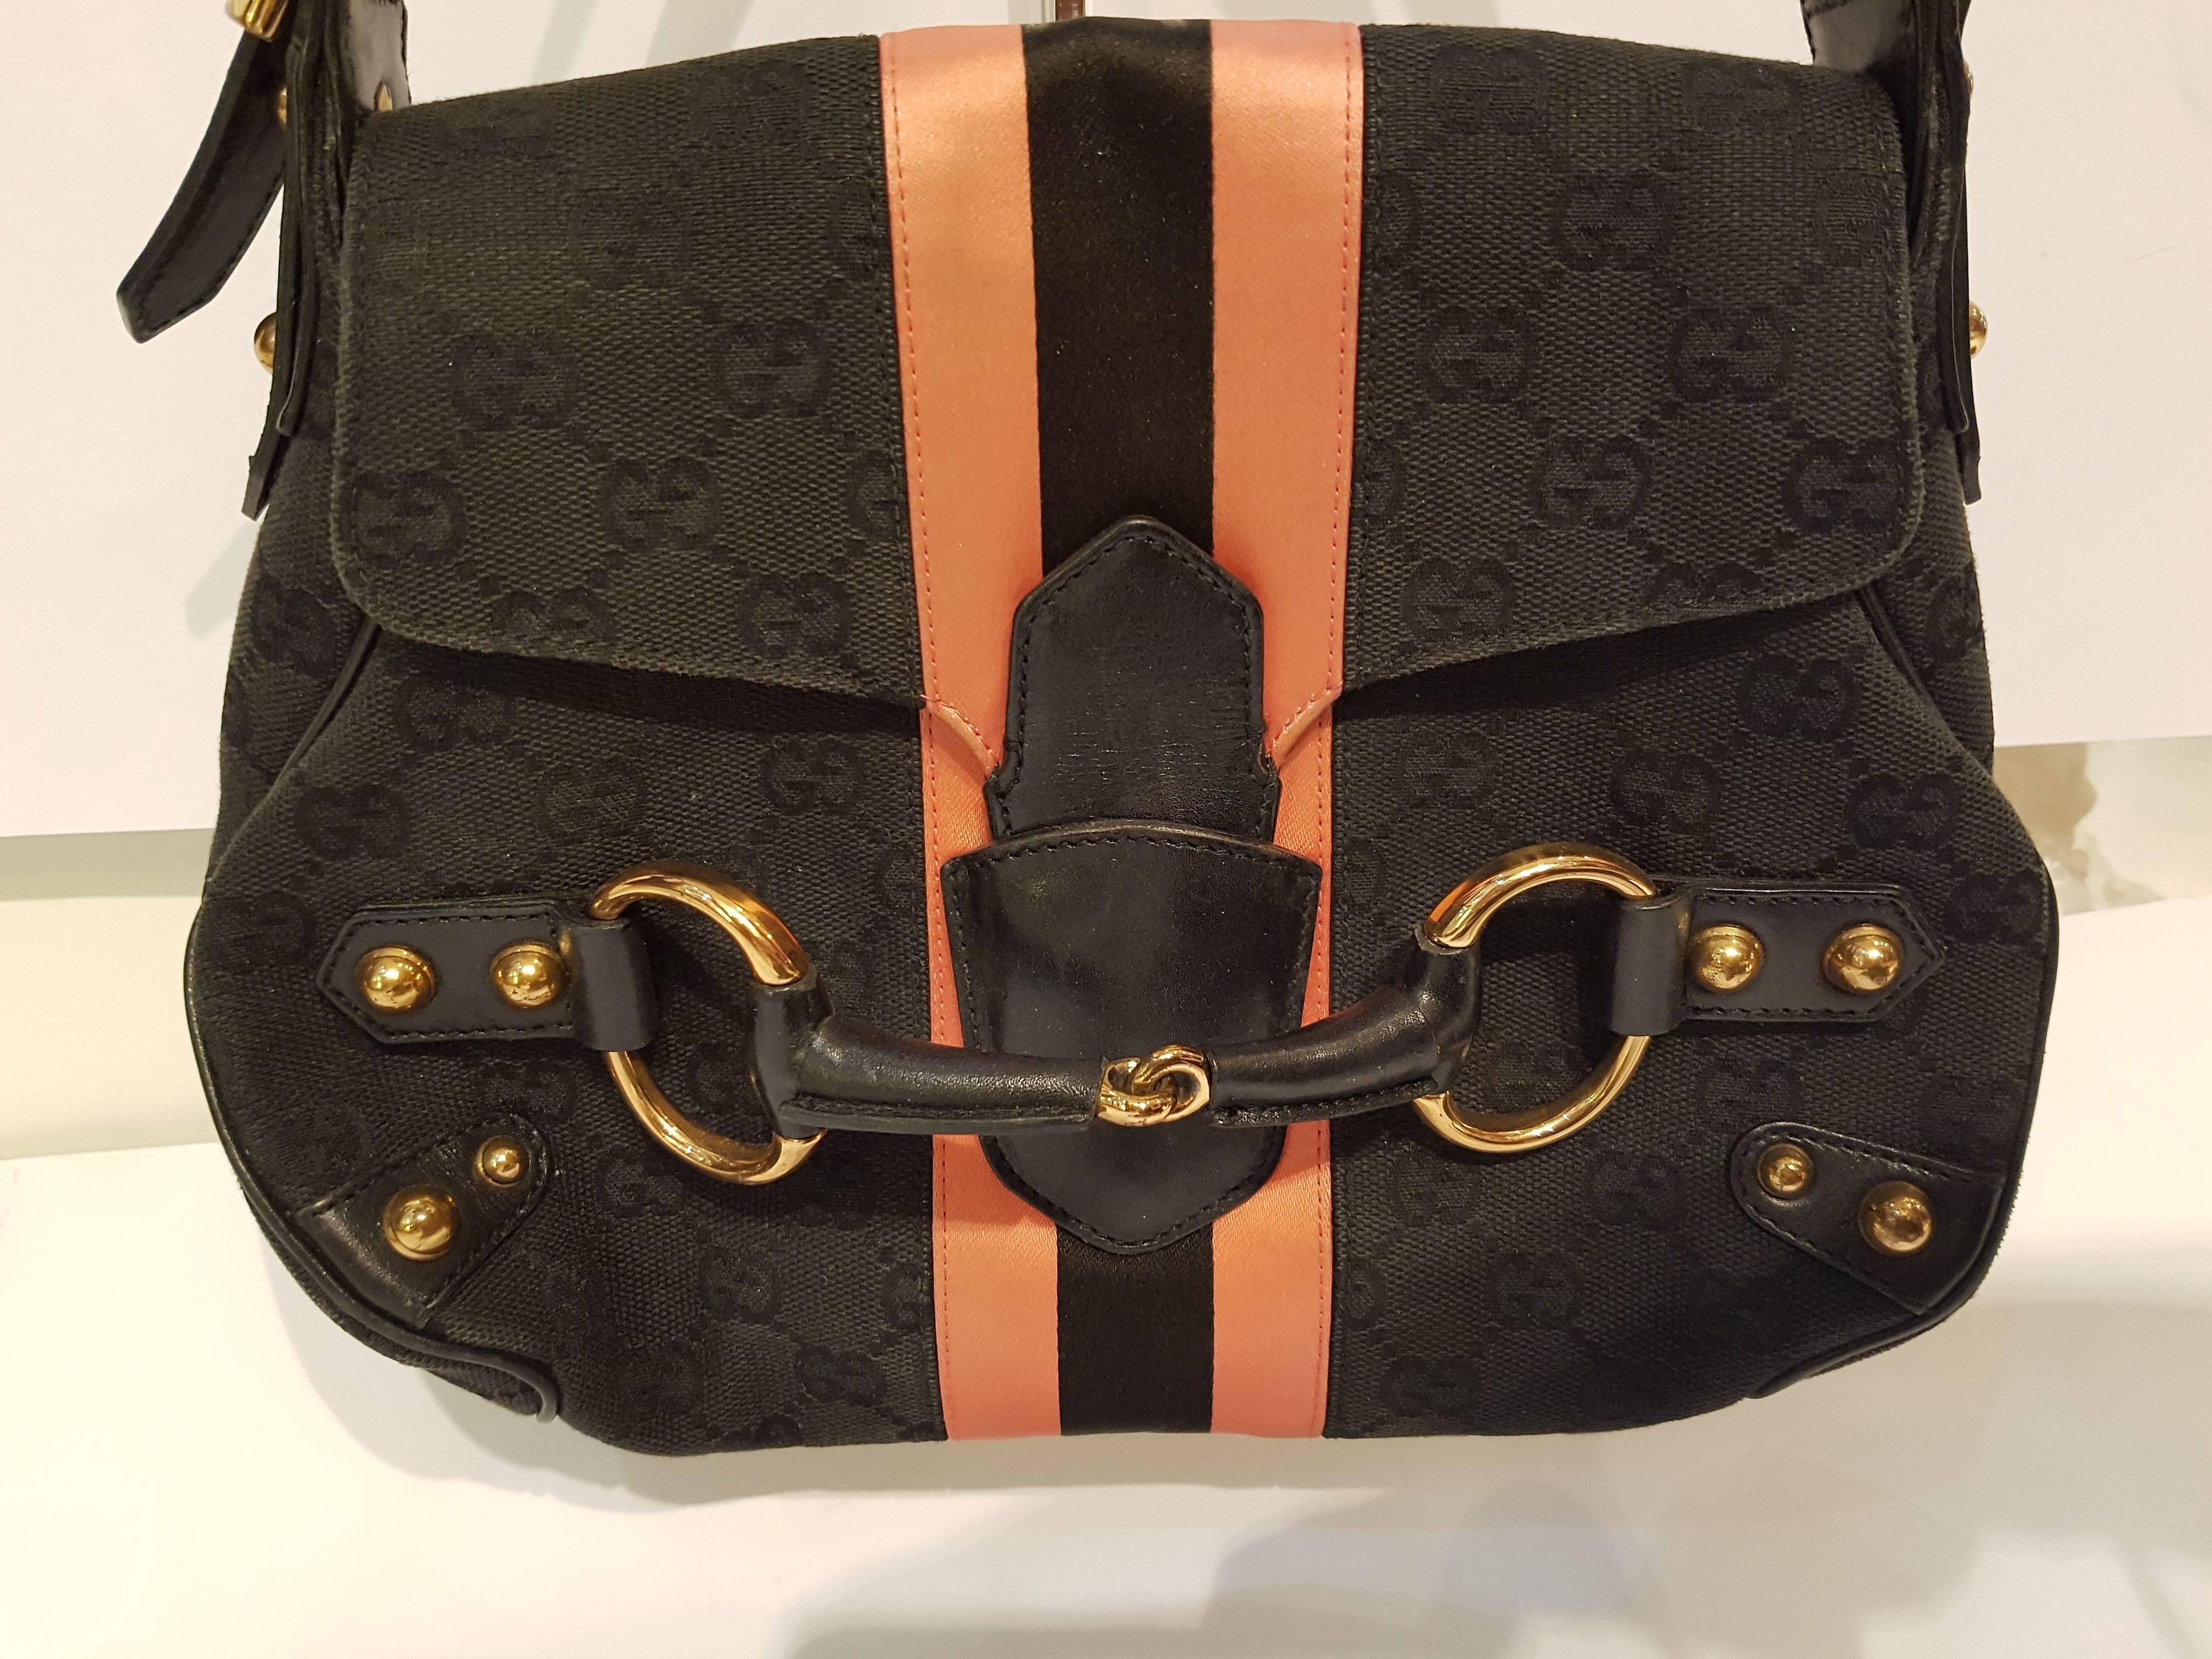 GUCCI Monogram Horsebit Web Flap Bag Black Pink 
The unique features and exceptional quality of this Gucci evening bag create a bold look of sophistication for evening. The bag is a standard size evening bag and is a sturdy pouch structure of black